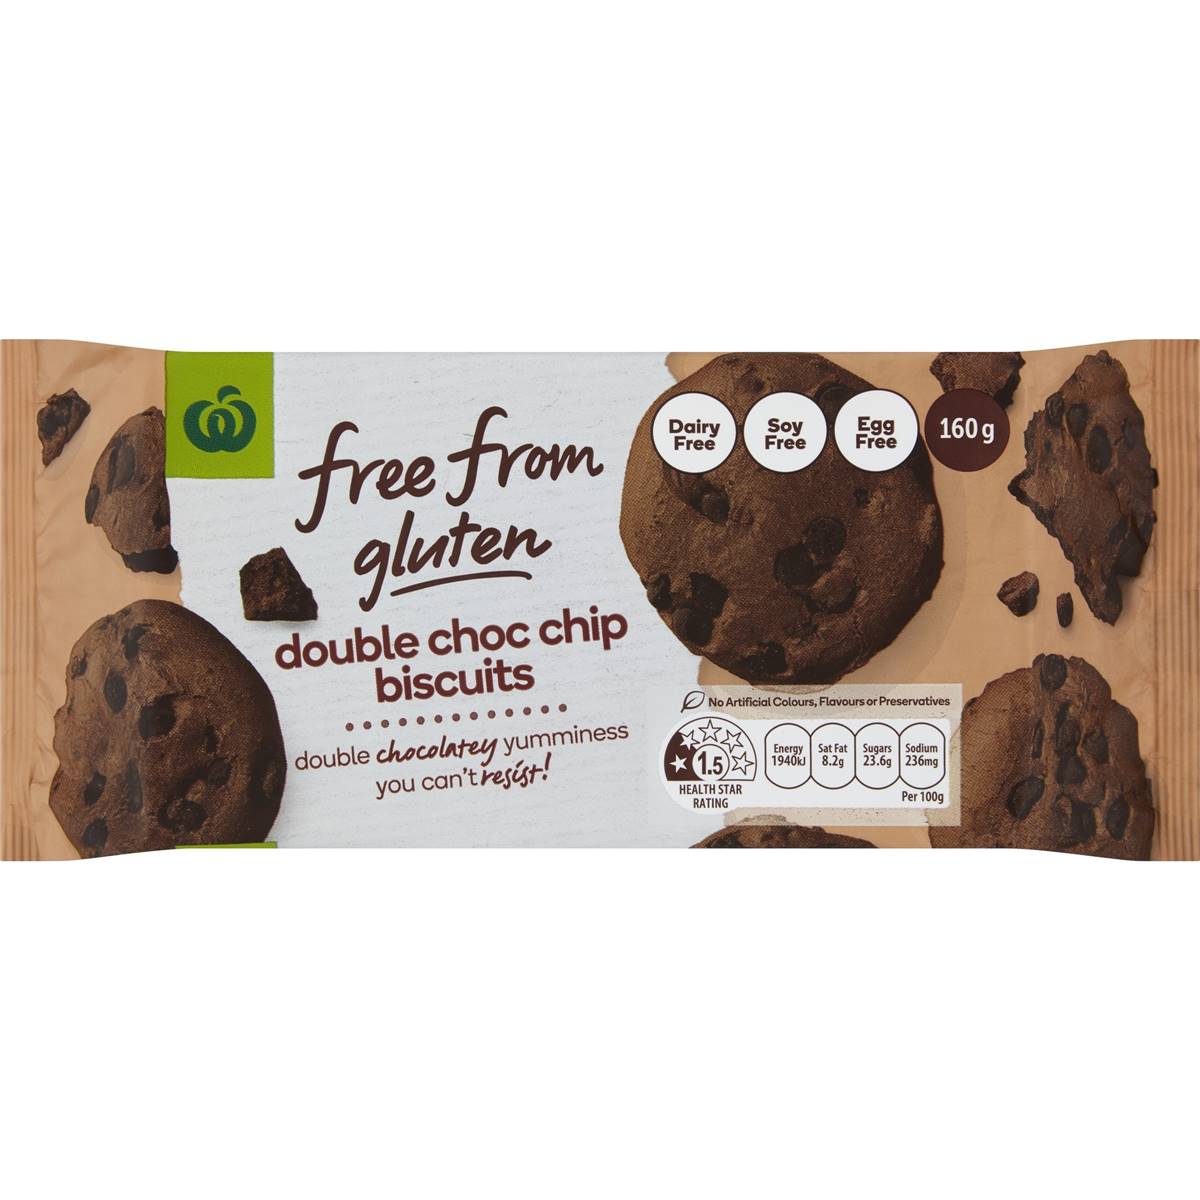 Calories in Woolworths Free From Gluten Double Choc Chip Biscuits